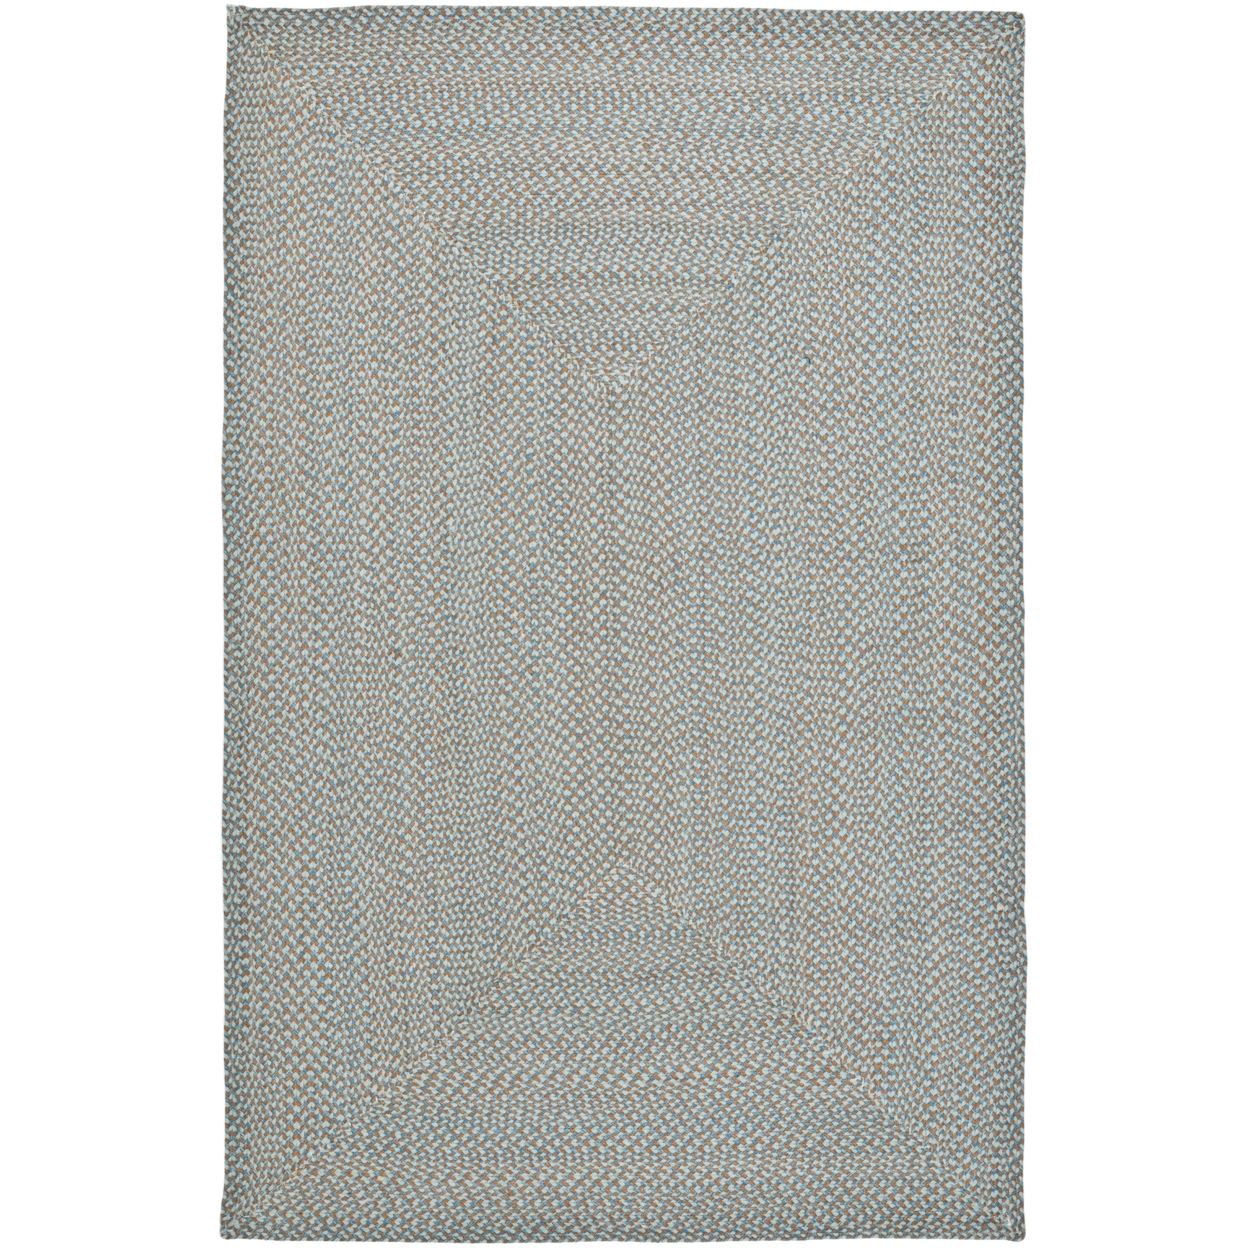 SAFAVIEH Braided Collection BRD170A Handwoven Multi Rug - 4' X 6' Oval